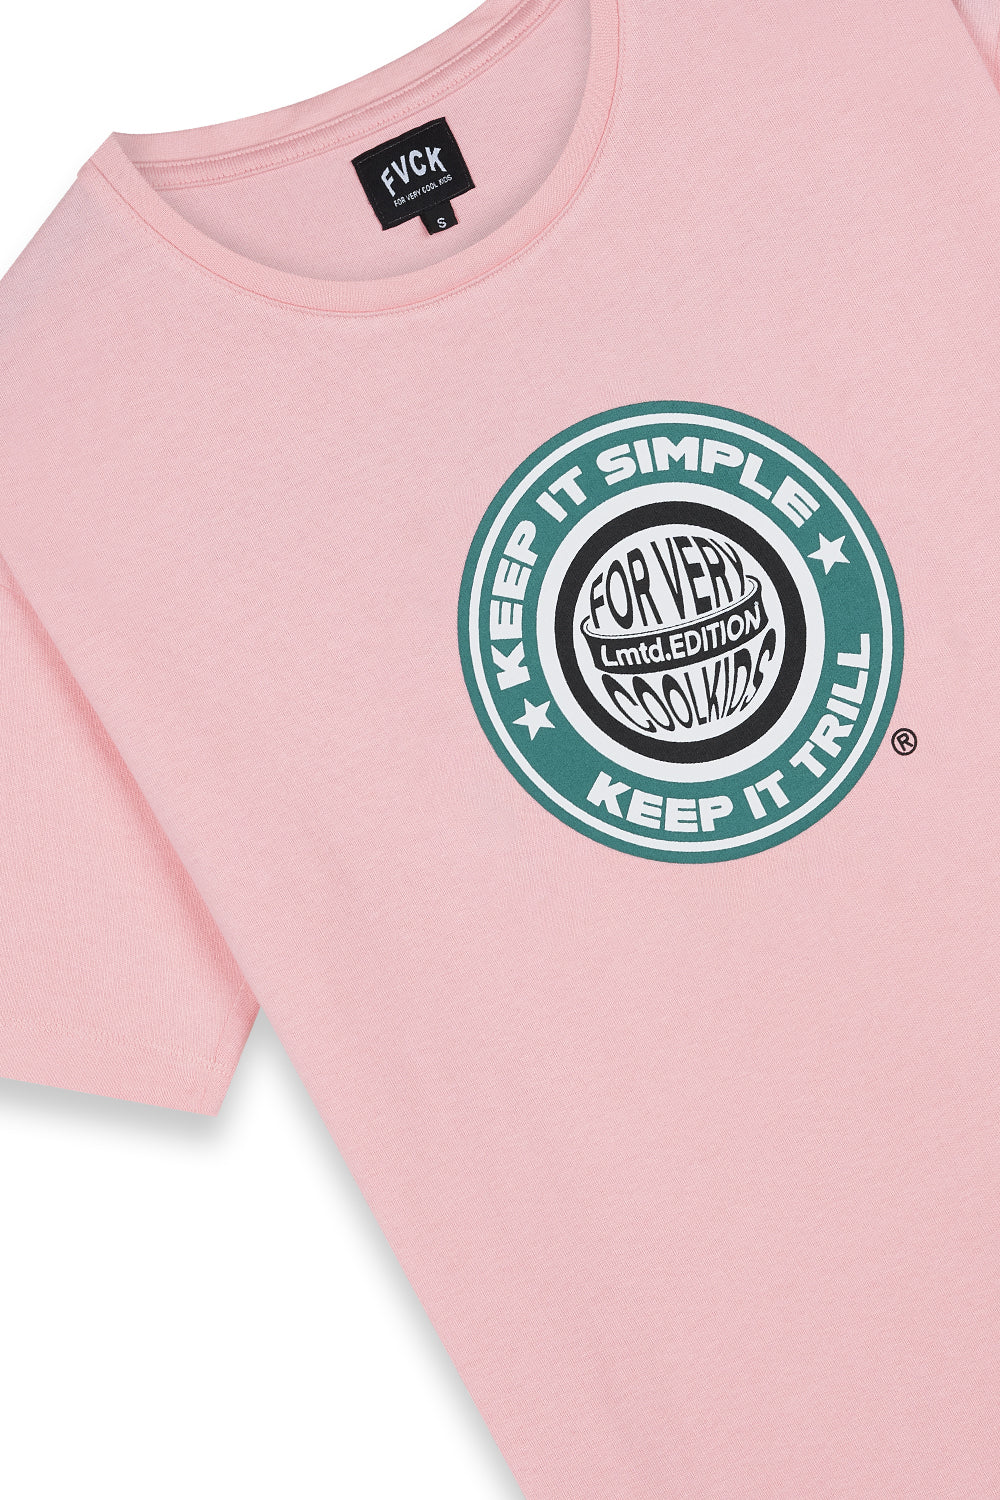 tshirt rose - t-shirt - shirt - tee - pink - baby pink - rose bonbon - streetwear - trill - keep it simple - street - paris - fvck - forverycoolkids - skate -tshirts rap - cool - for very cool kids - tealer - wasted paris - weiz - citadium - meilleure marque française - francaises - 